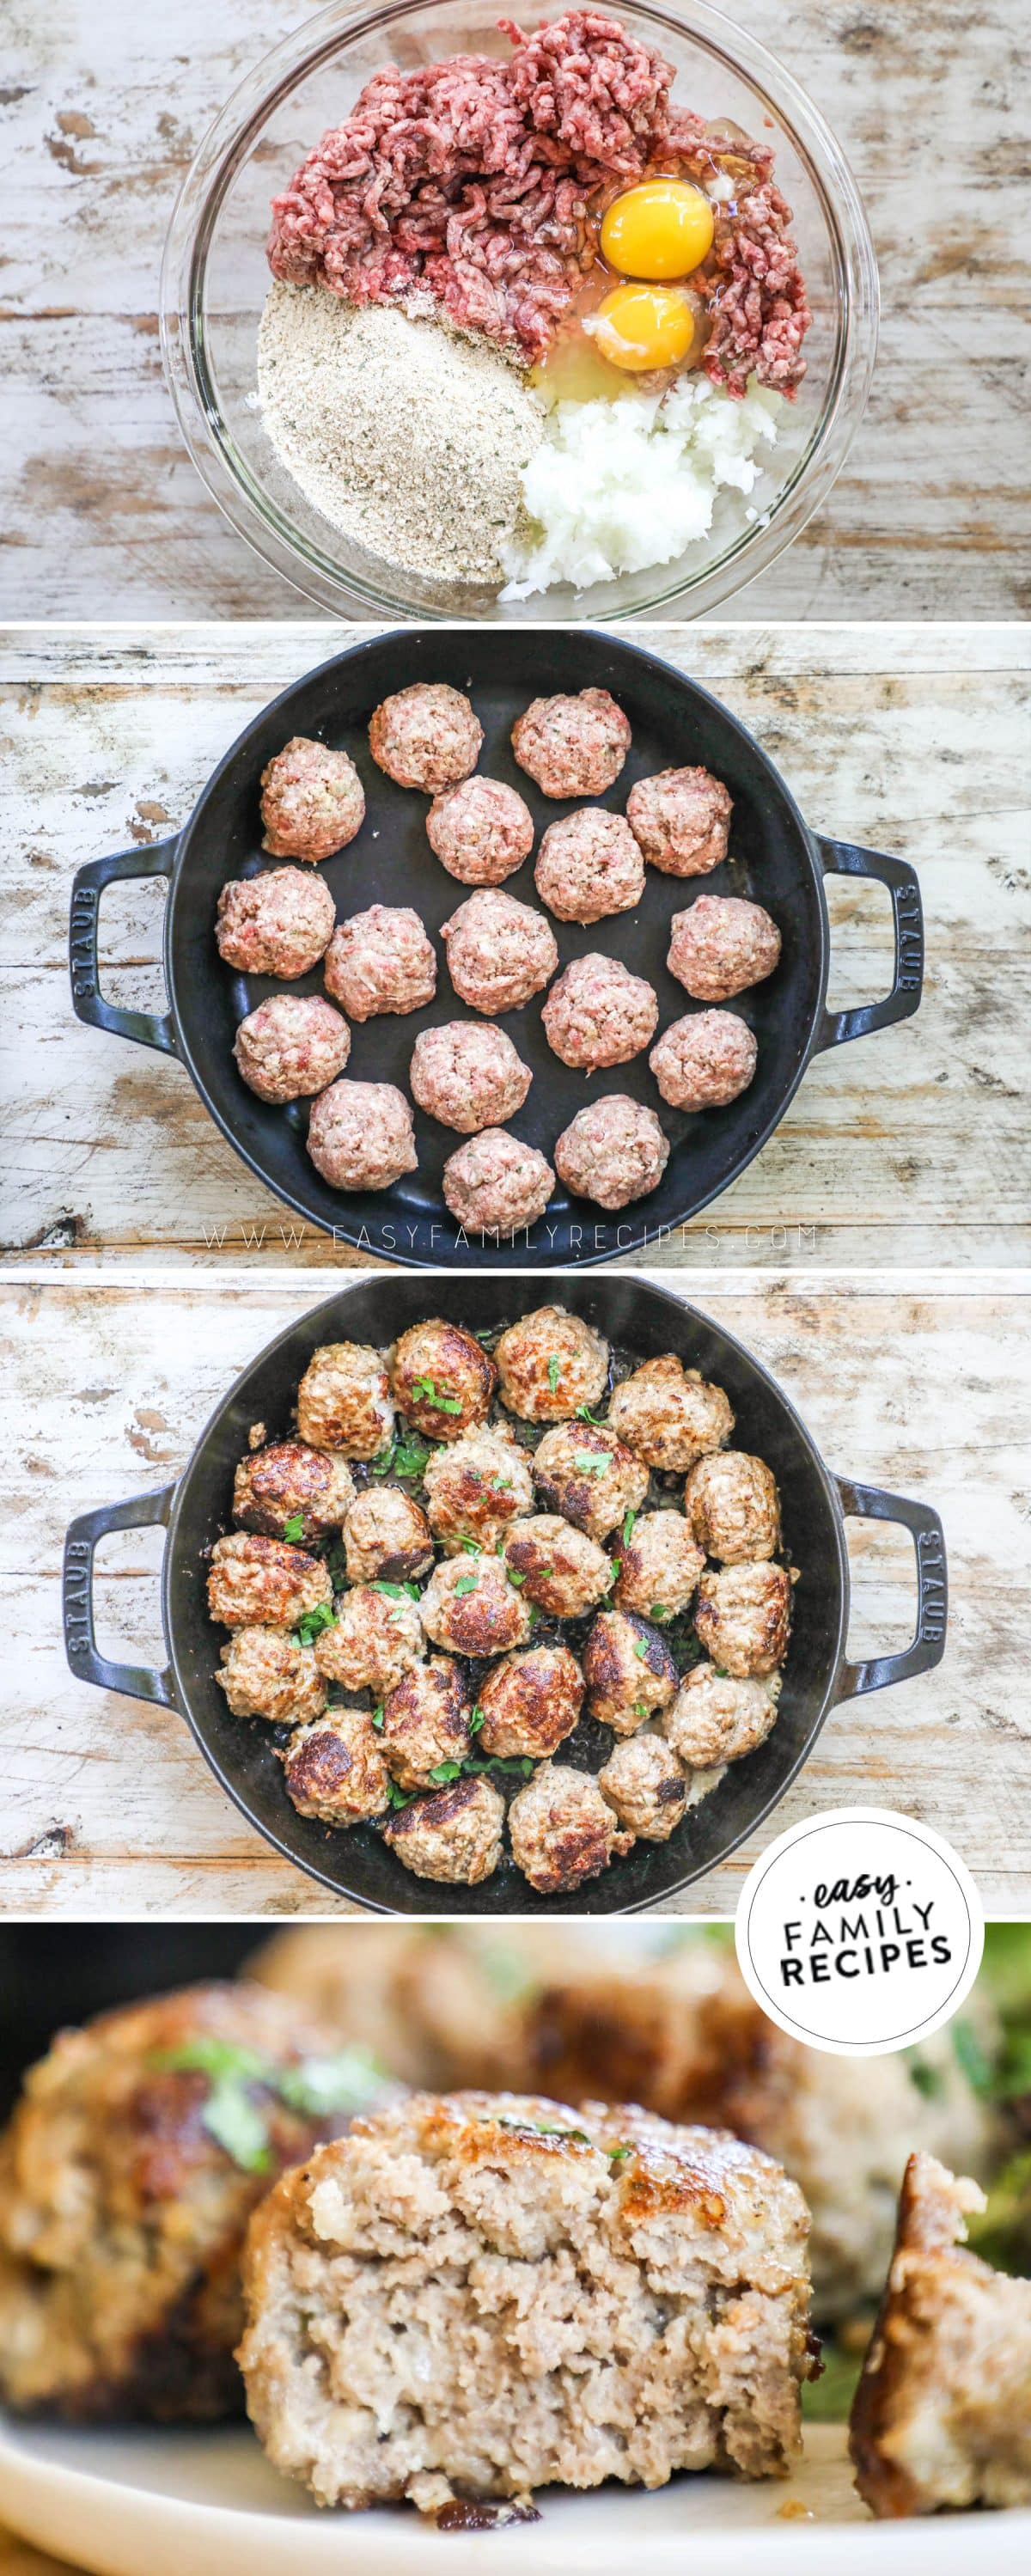 Image collage with one photo of the homestyle meatballs in a skillet on the stove. The other image is of meatballs on a platter after they have come out of the oven. The meatball is cut open to show the juicy inside.